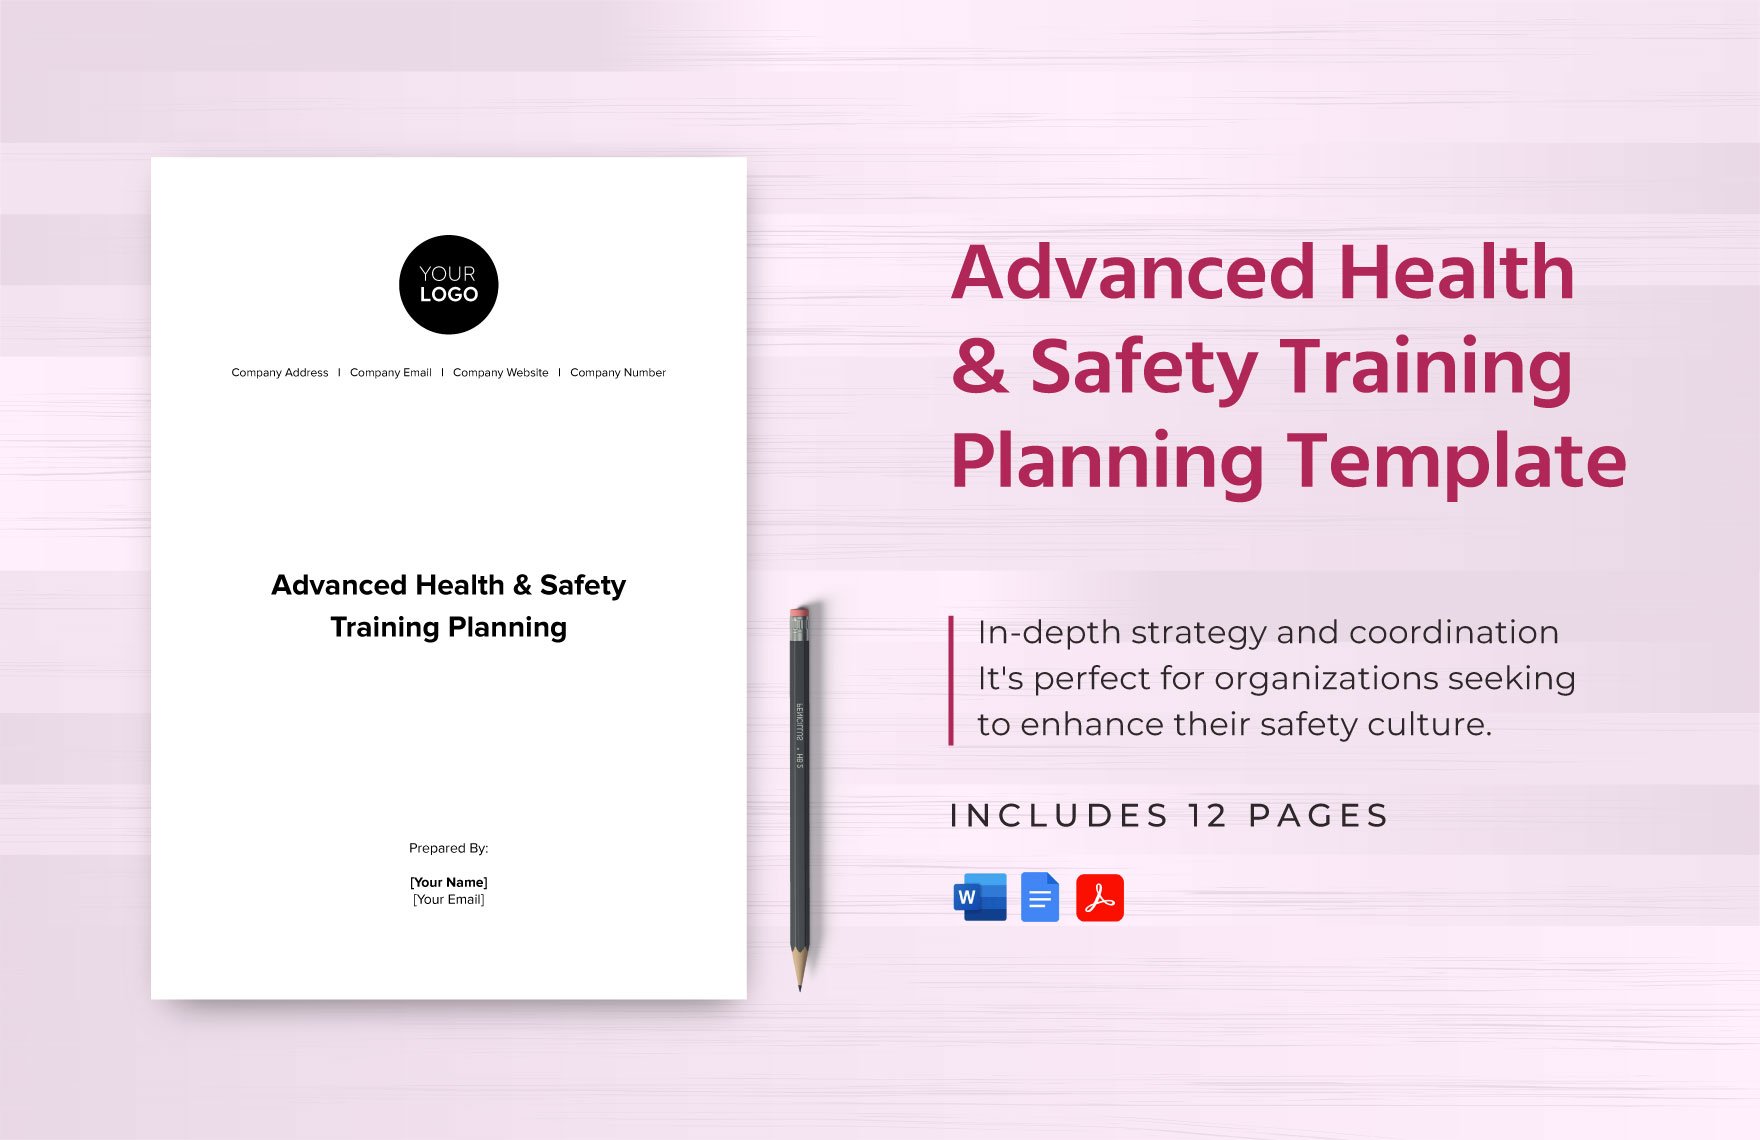 Advanced Health & Safety Training Planning Template